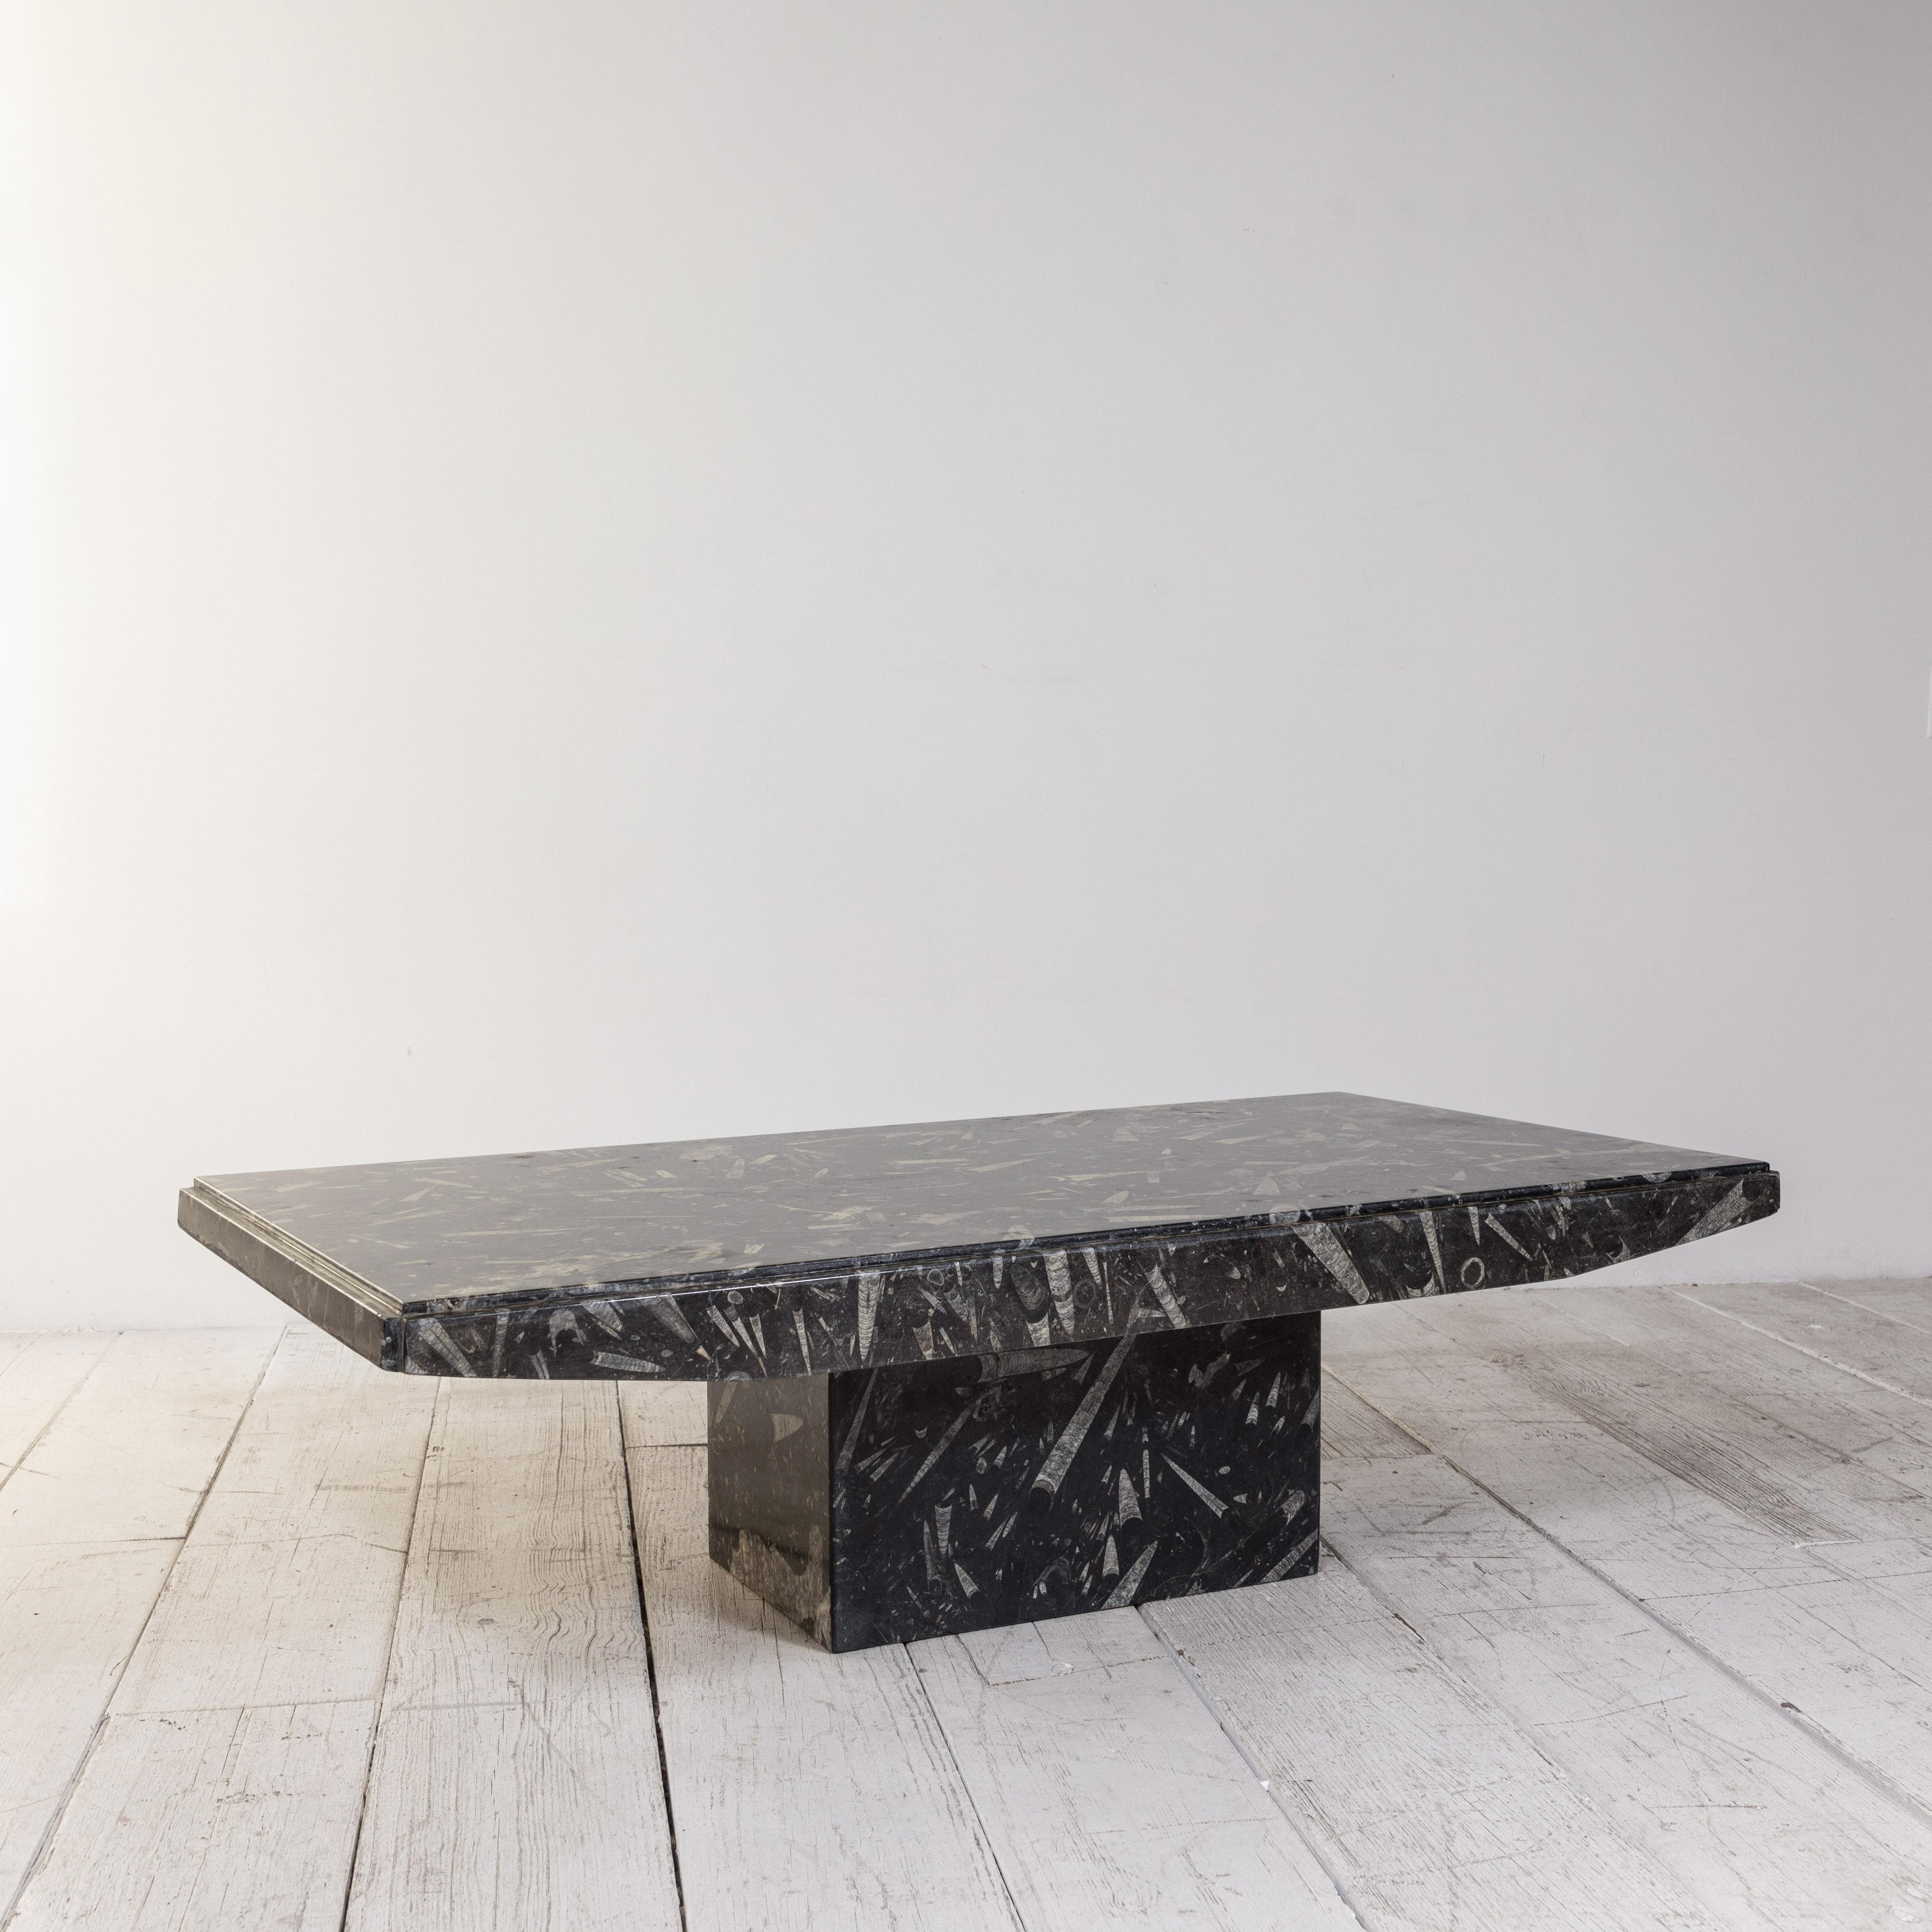 Black and white modernist marble cocktail table adds a modern clean touch to any space.